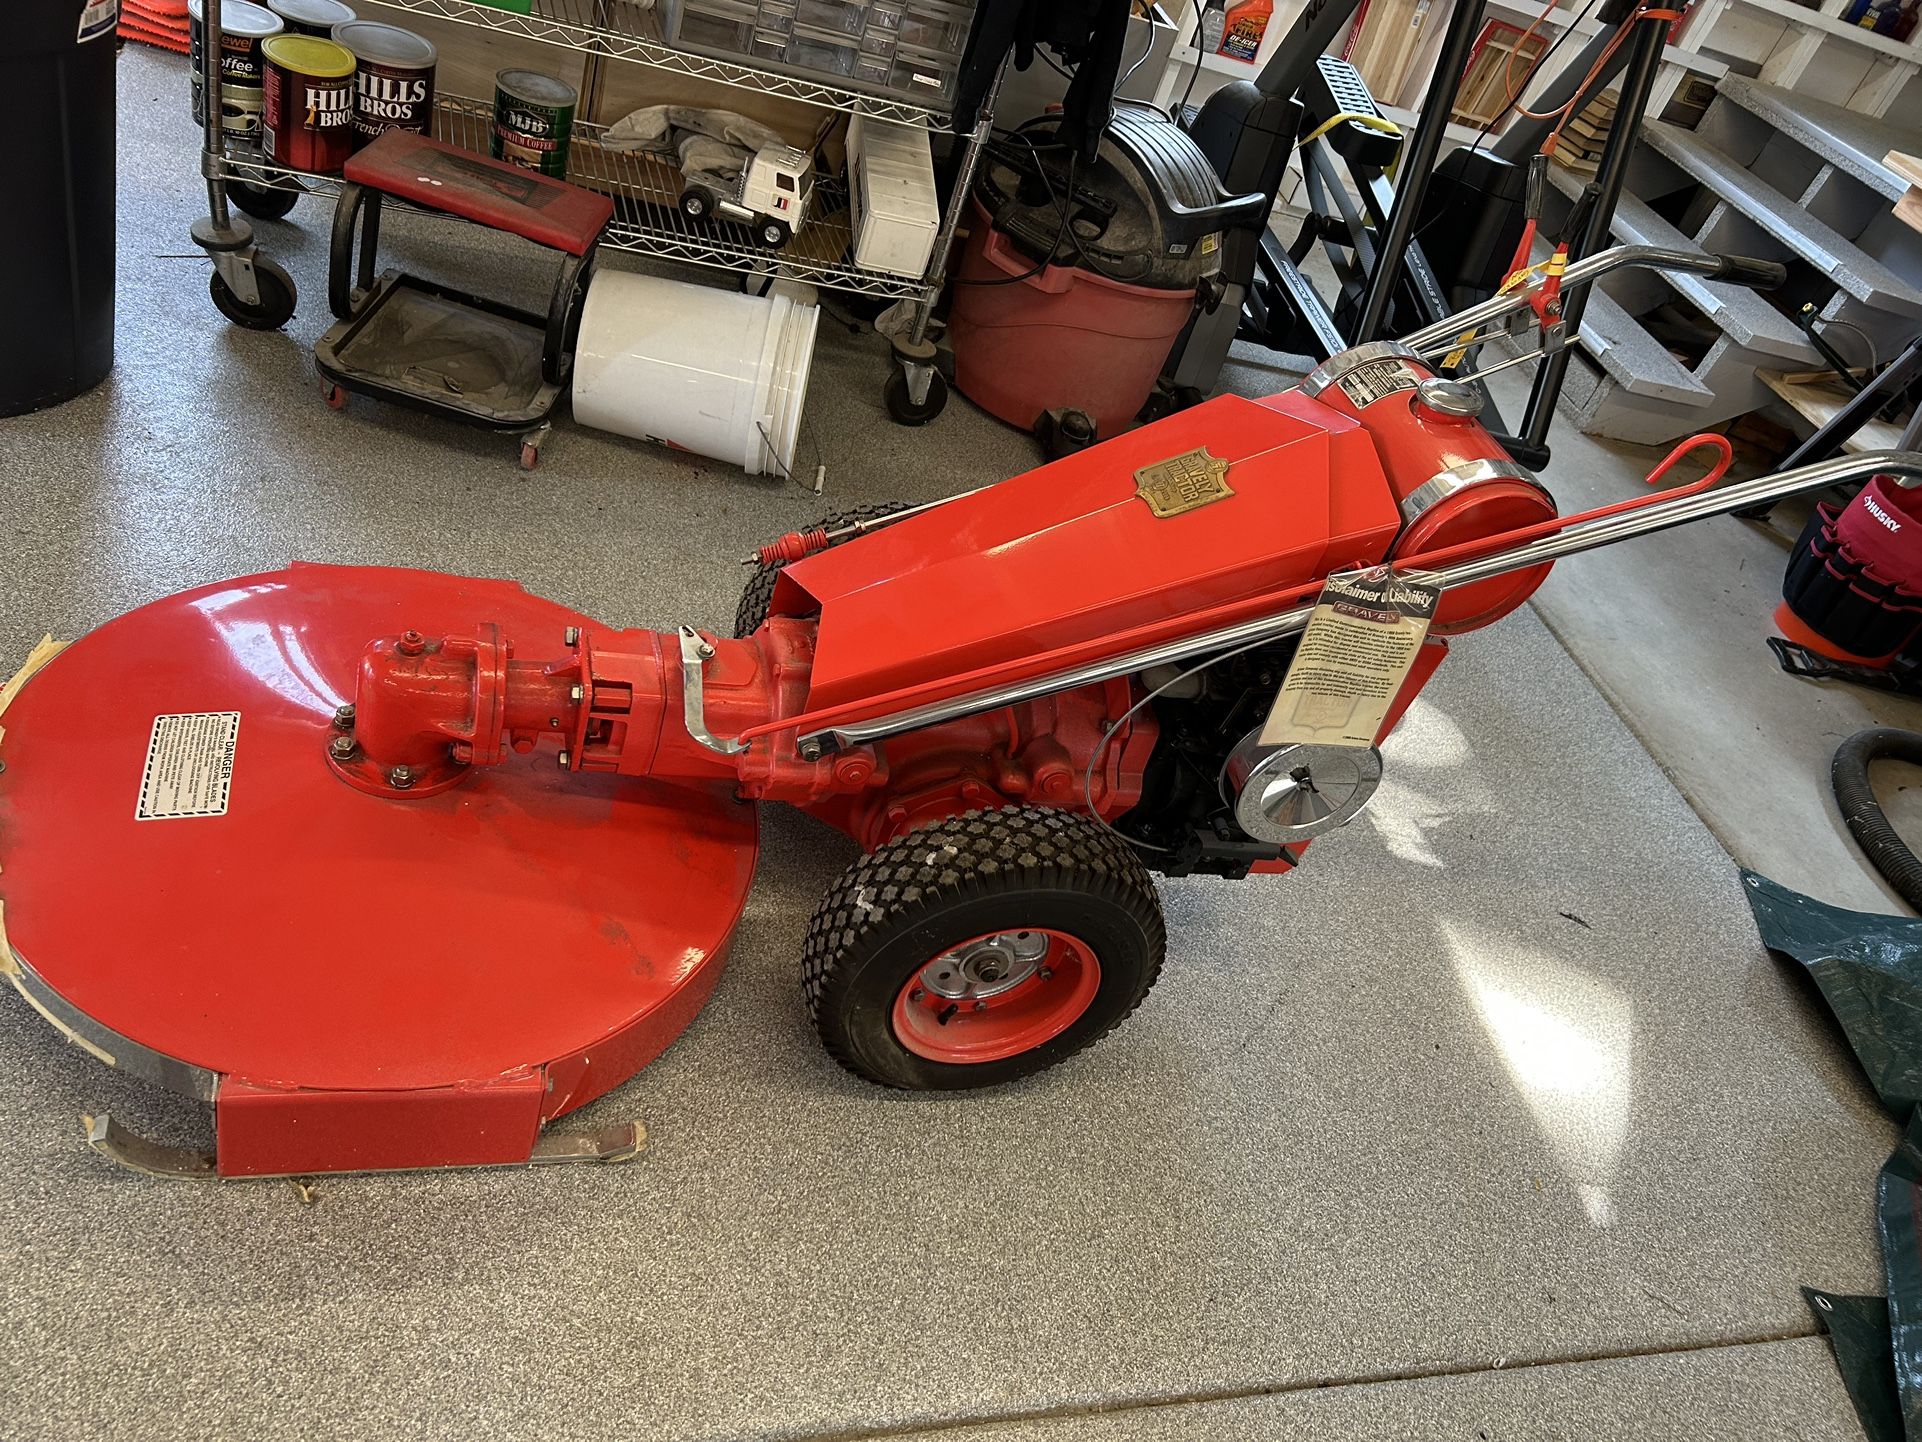 90th Anniversary Gravely Tractor 